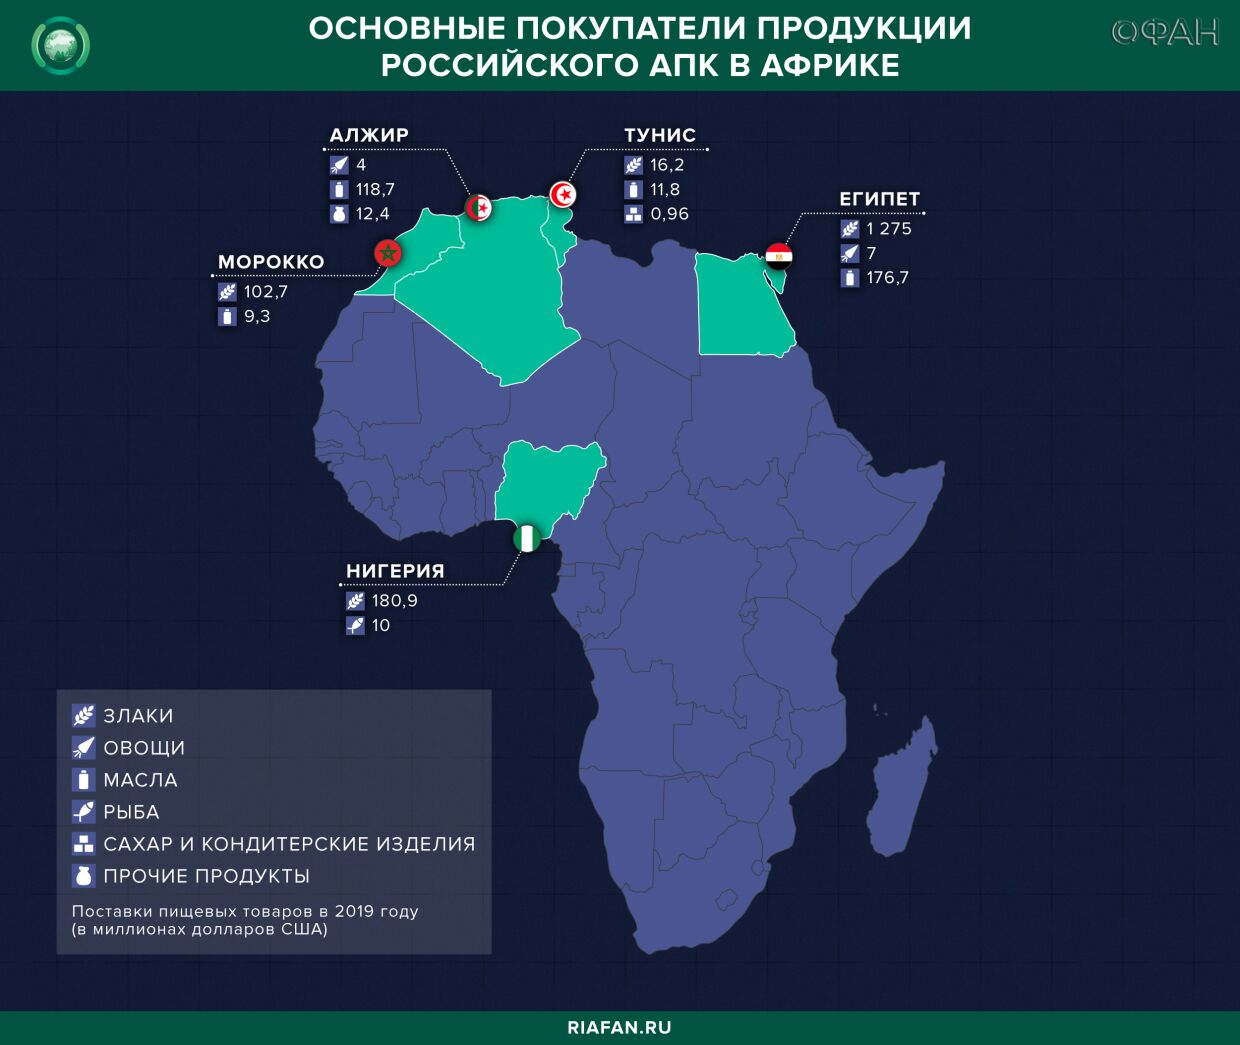 The transshipment terminal in Murmansk will open African markets for grain from the Russian Federation